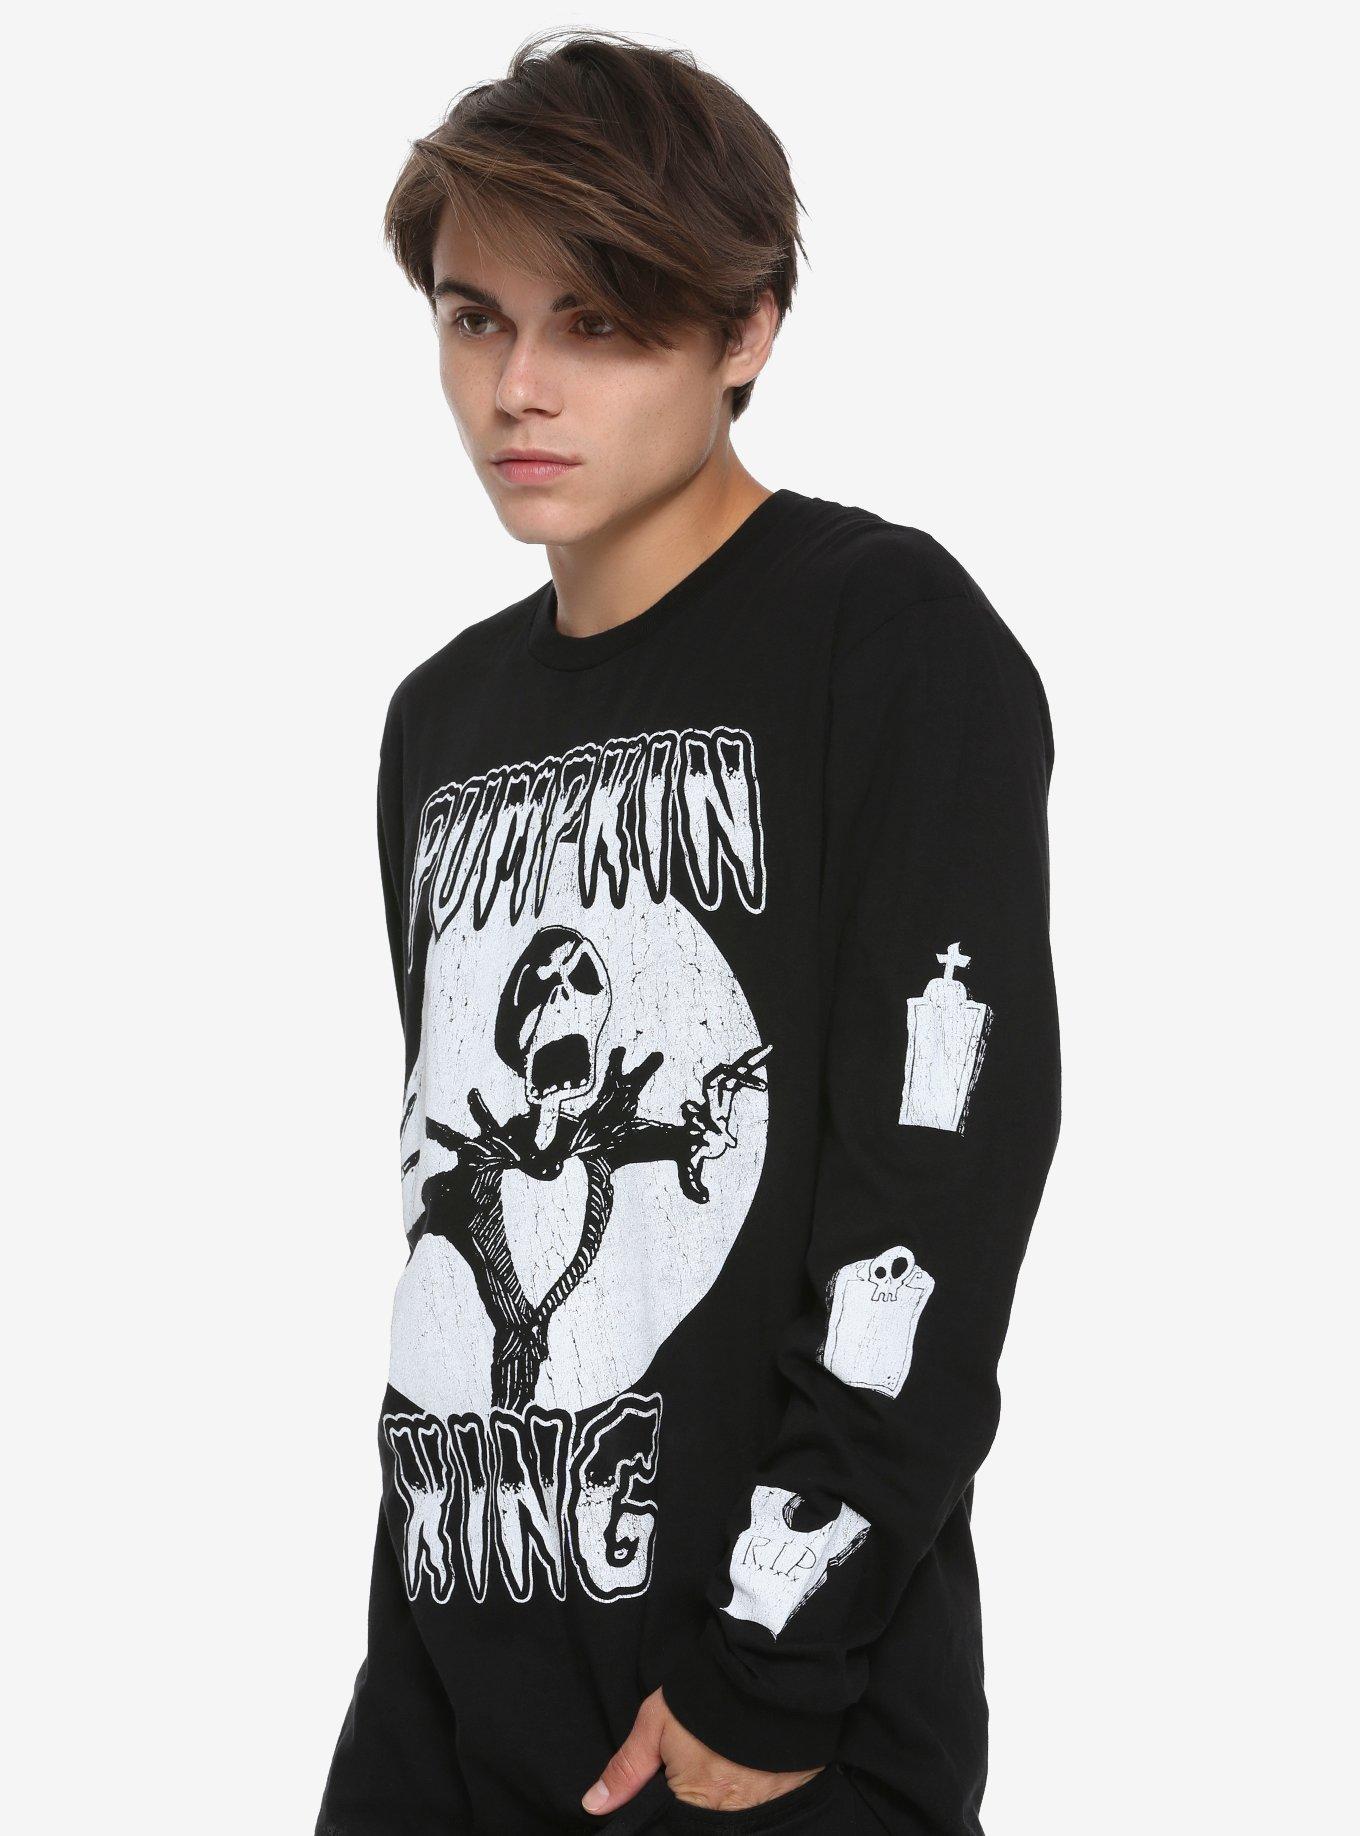 The Nightmare Before Christmas Pumpkin King Long-Sleeve T-Shirt Hot Topic Exclusive, BLACK, hi-res